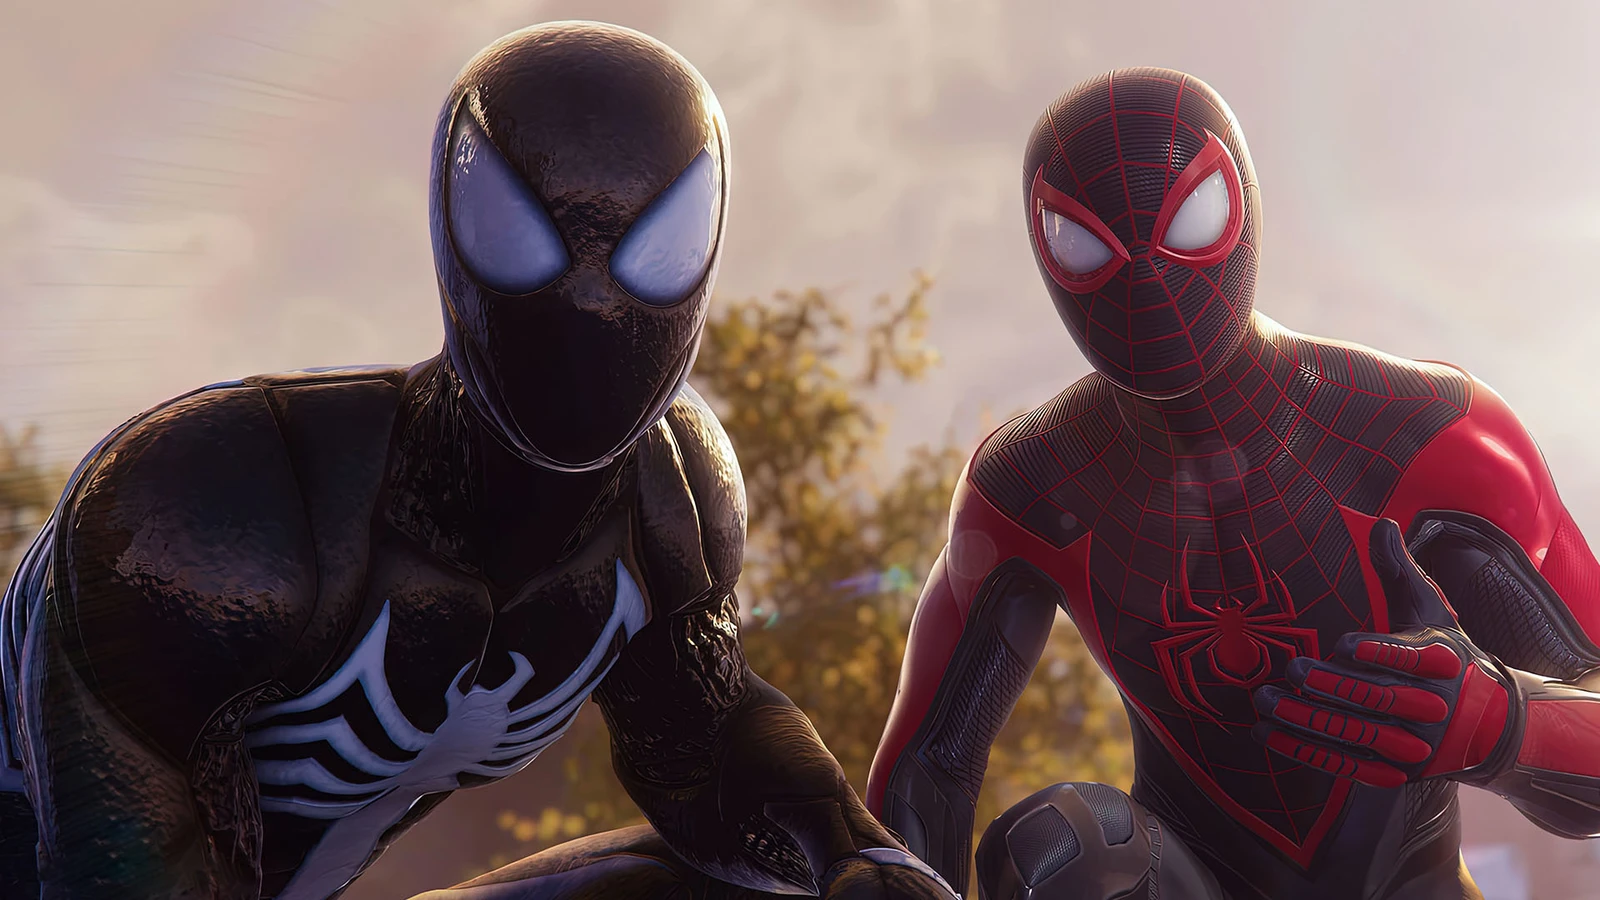 Gamers will be able to easily switch between Peter Parker and Miles Morales in Marvel's Spider-Man 2.